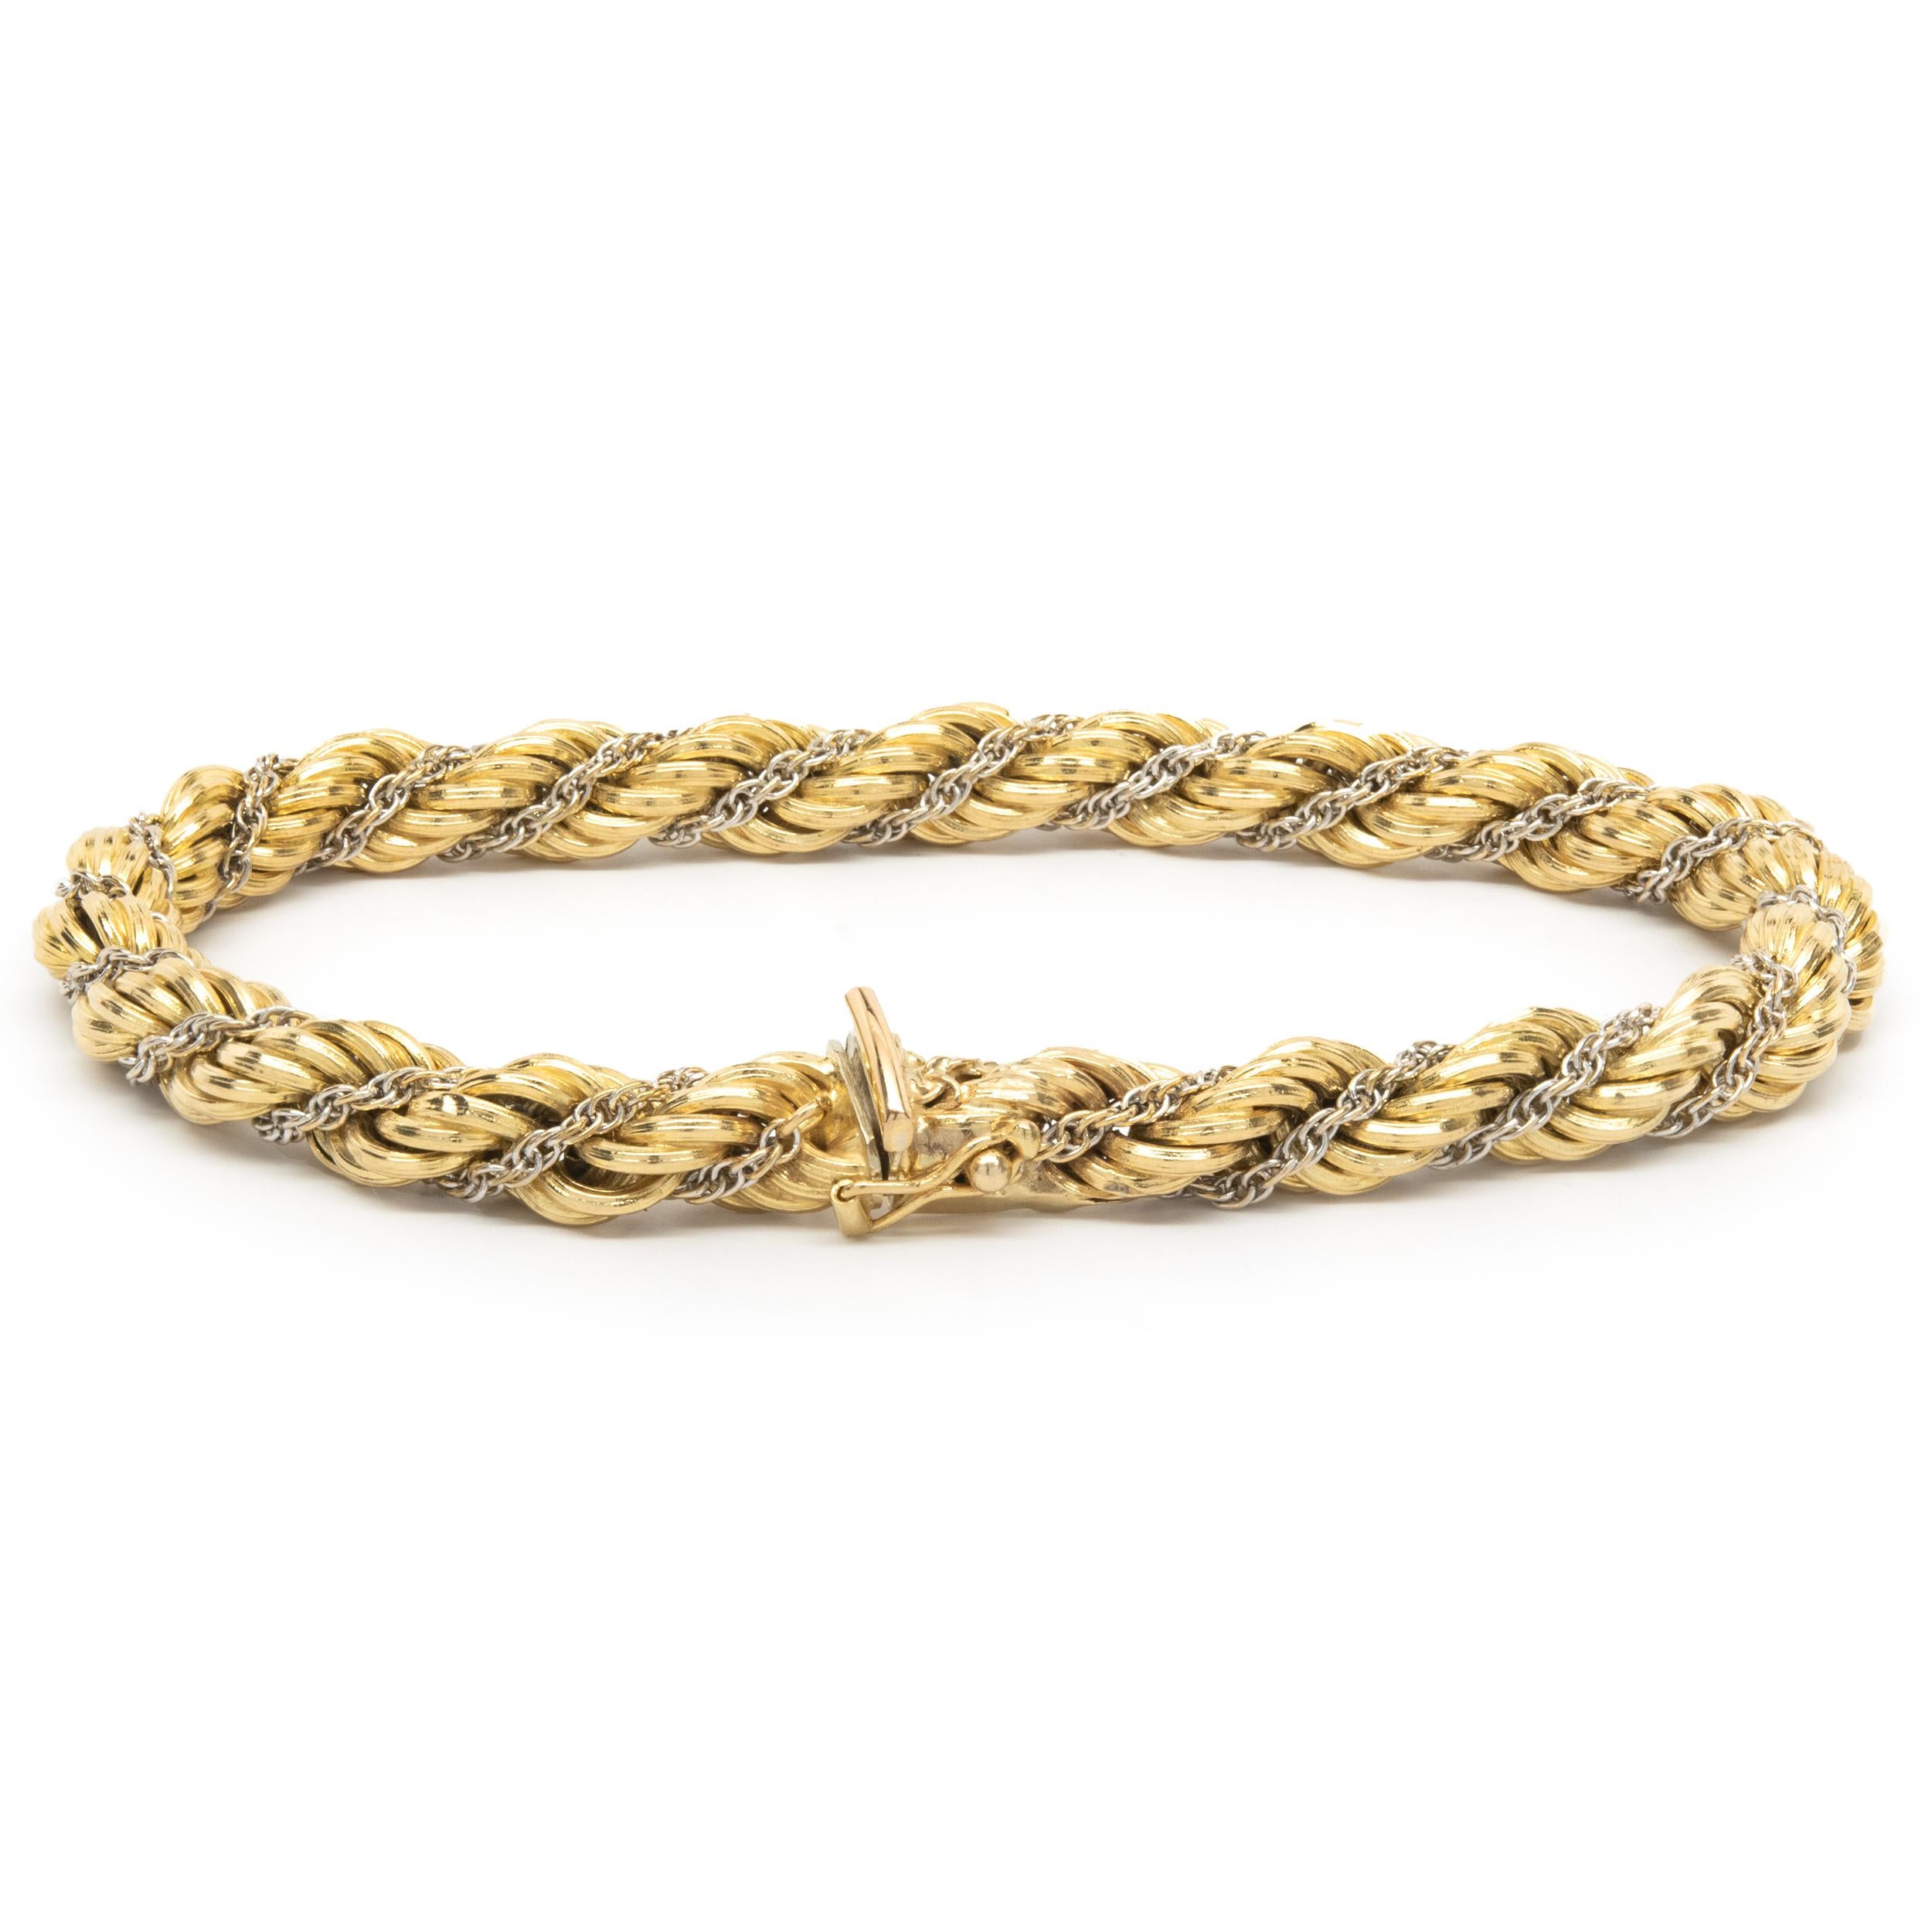 Designer: Tiffany & Co. 
Material: 18K yellow and white gold
Dimensions: bracelet measures 8-inches in length
Weight: 17.22 grams
